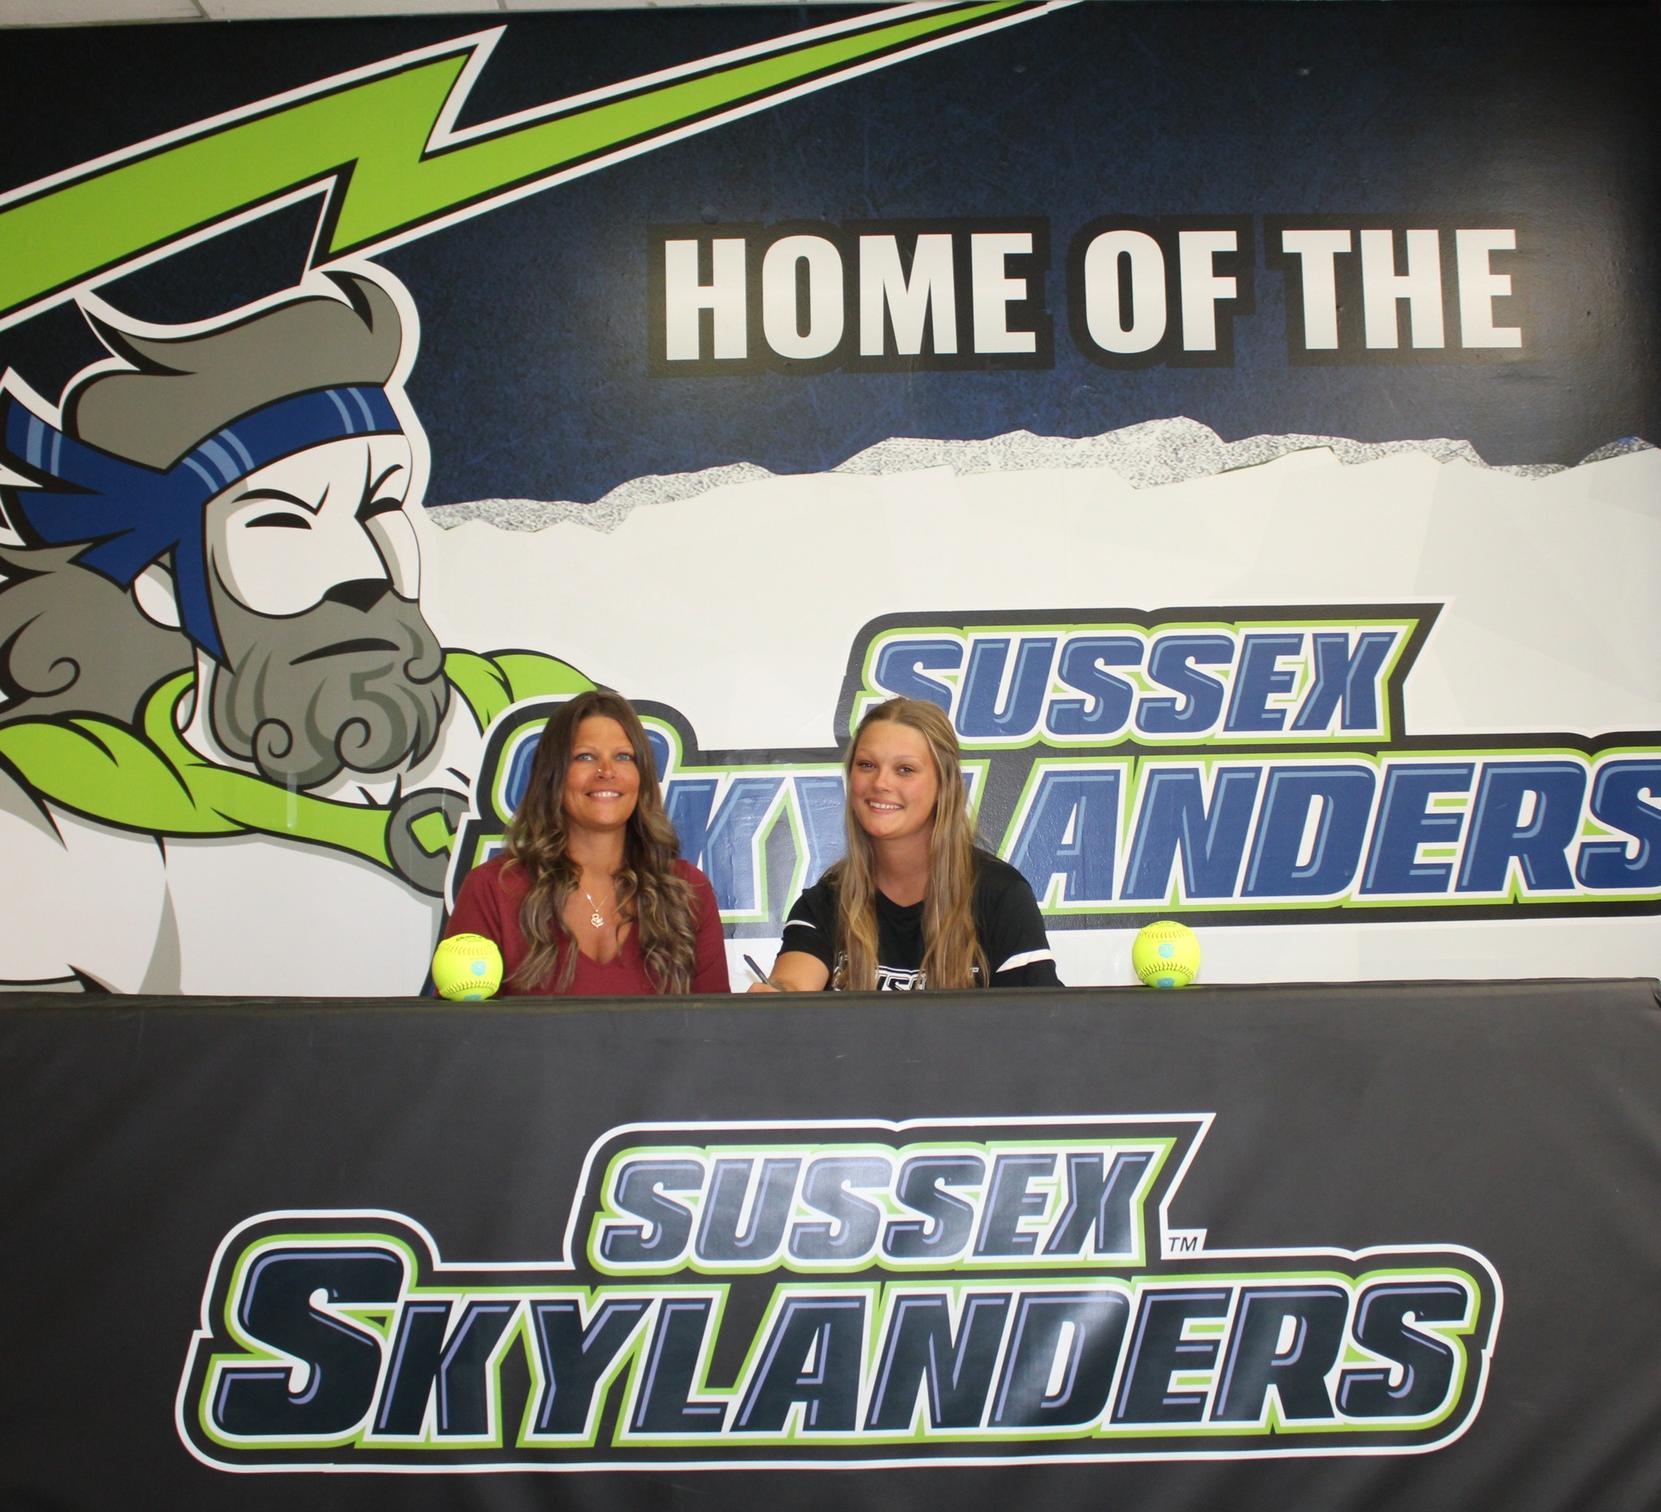 High Points Carlynn Cronen Inks with Sussex Softball